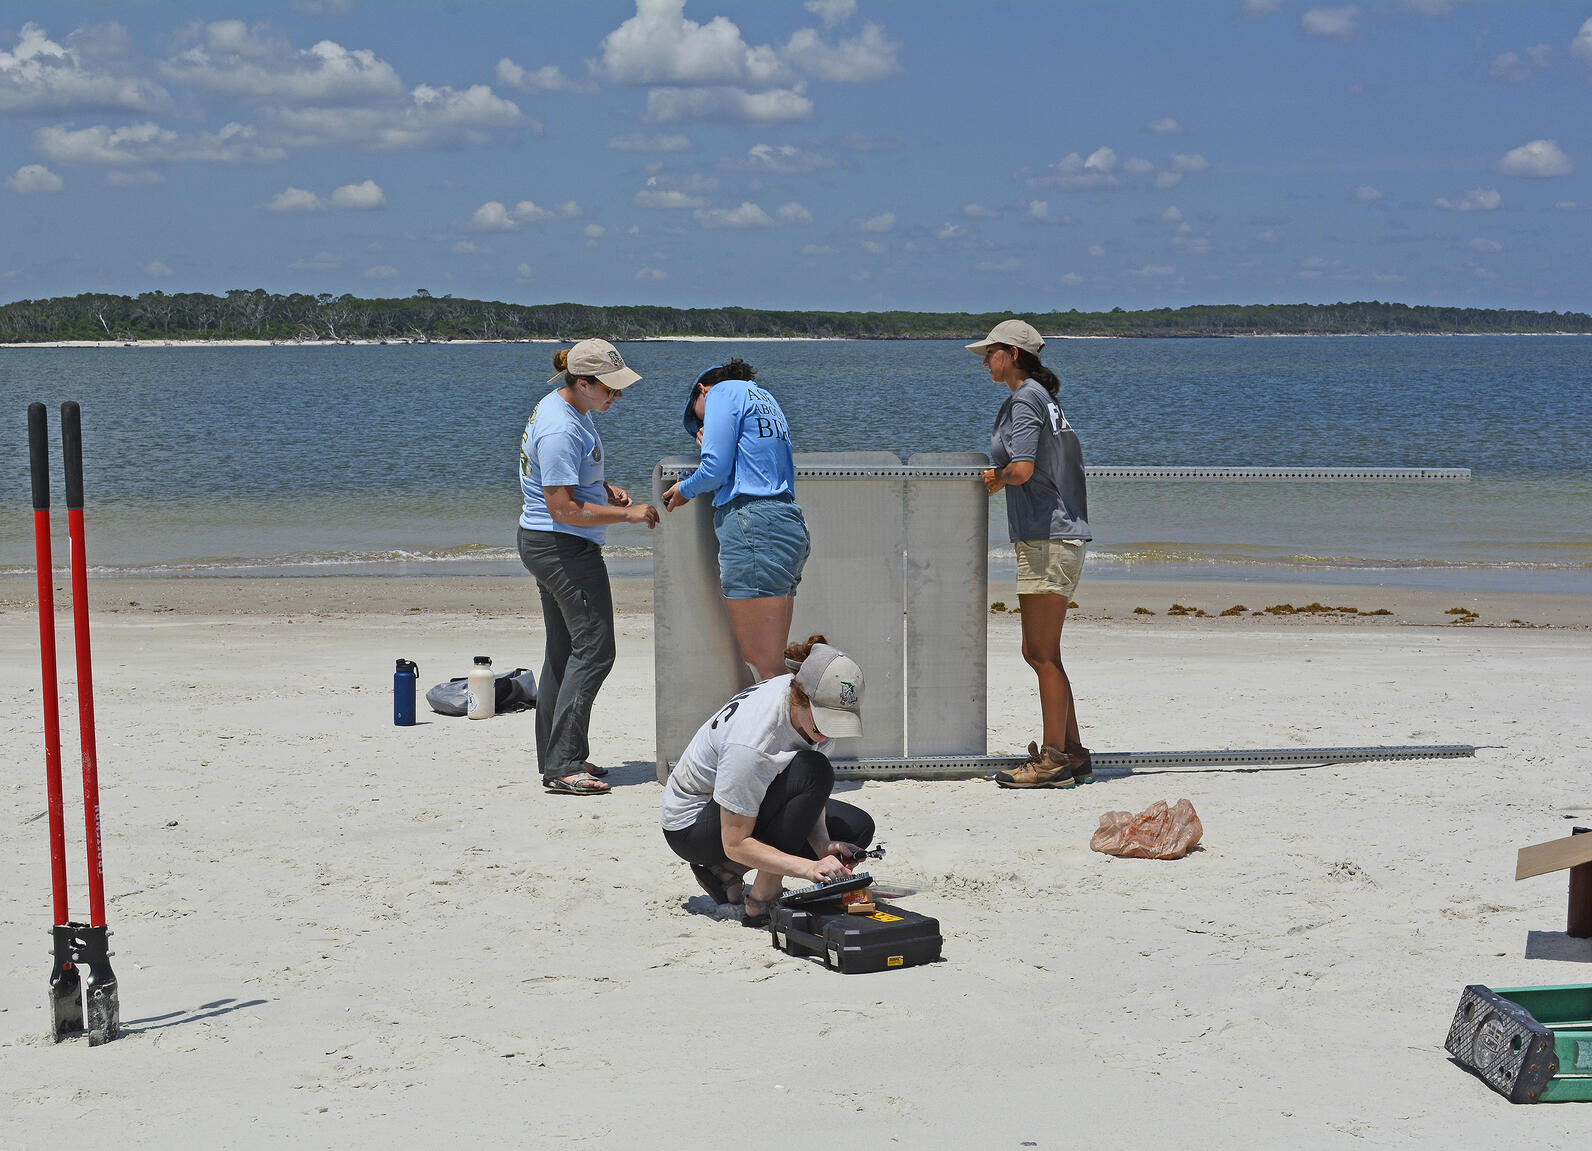 Volunteers put up signs on a sandy island, water in the background.